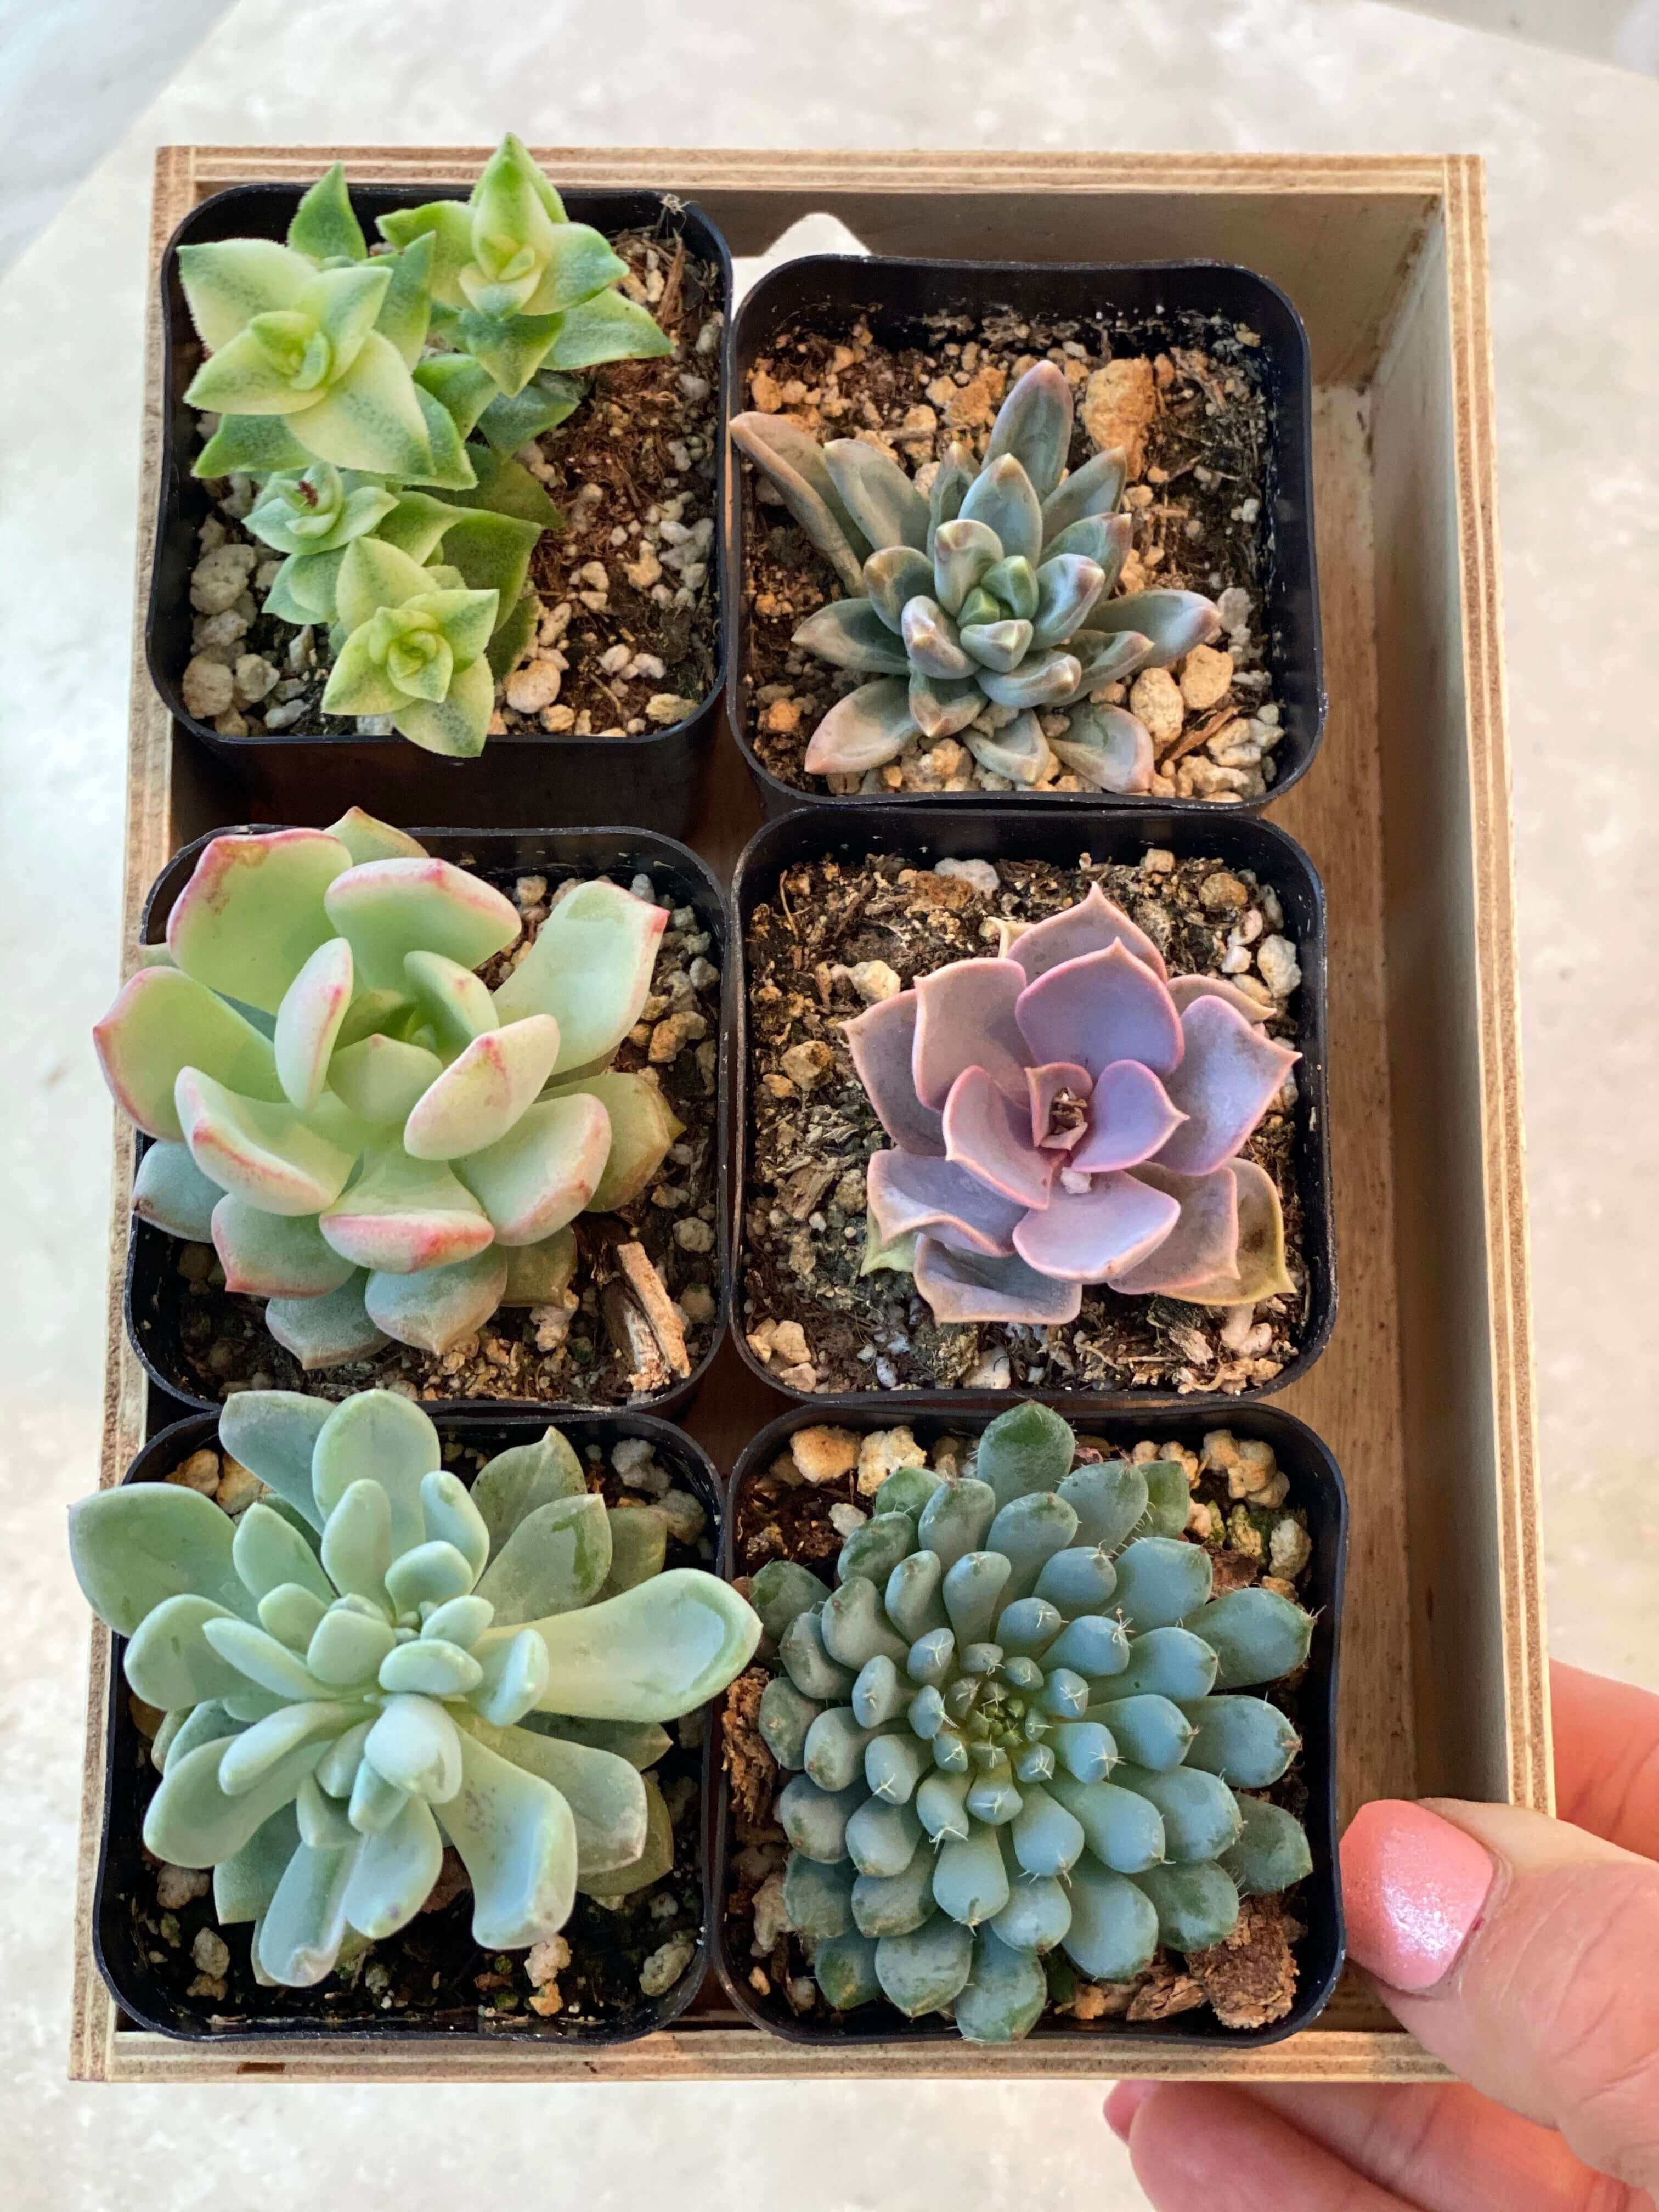 Array of 2-inch succulents in a multi-pack, displaying a spectrum of greens and other natural tones.